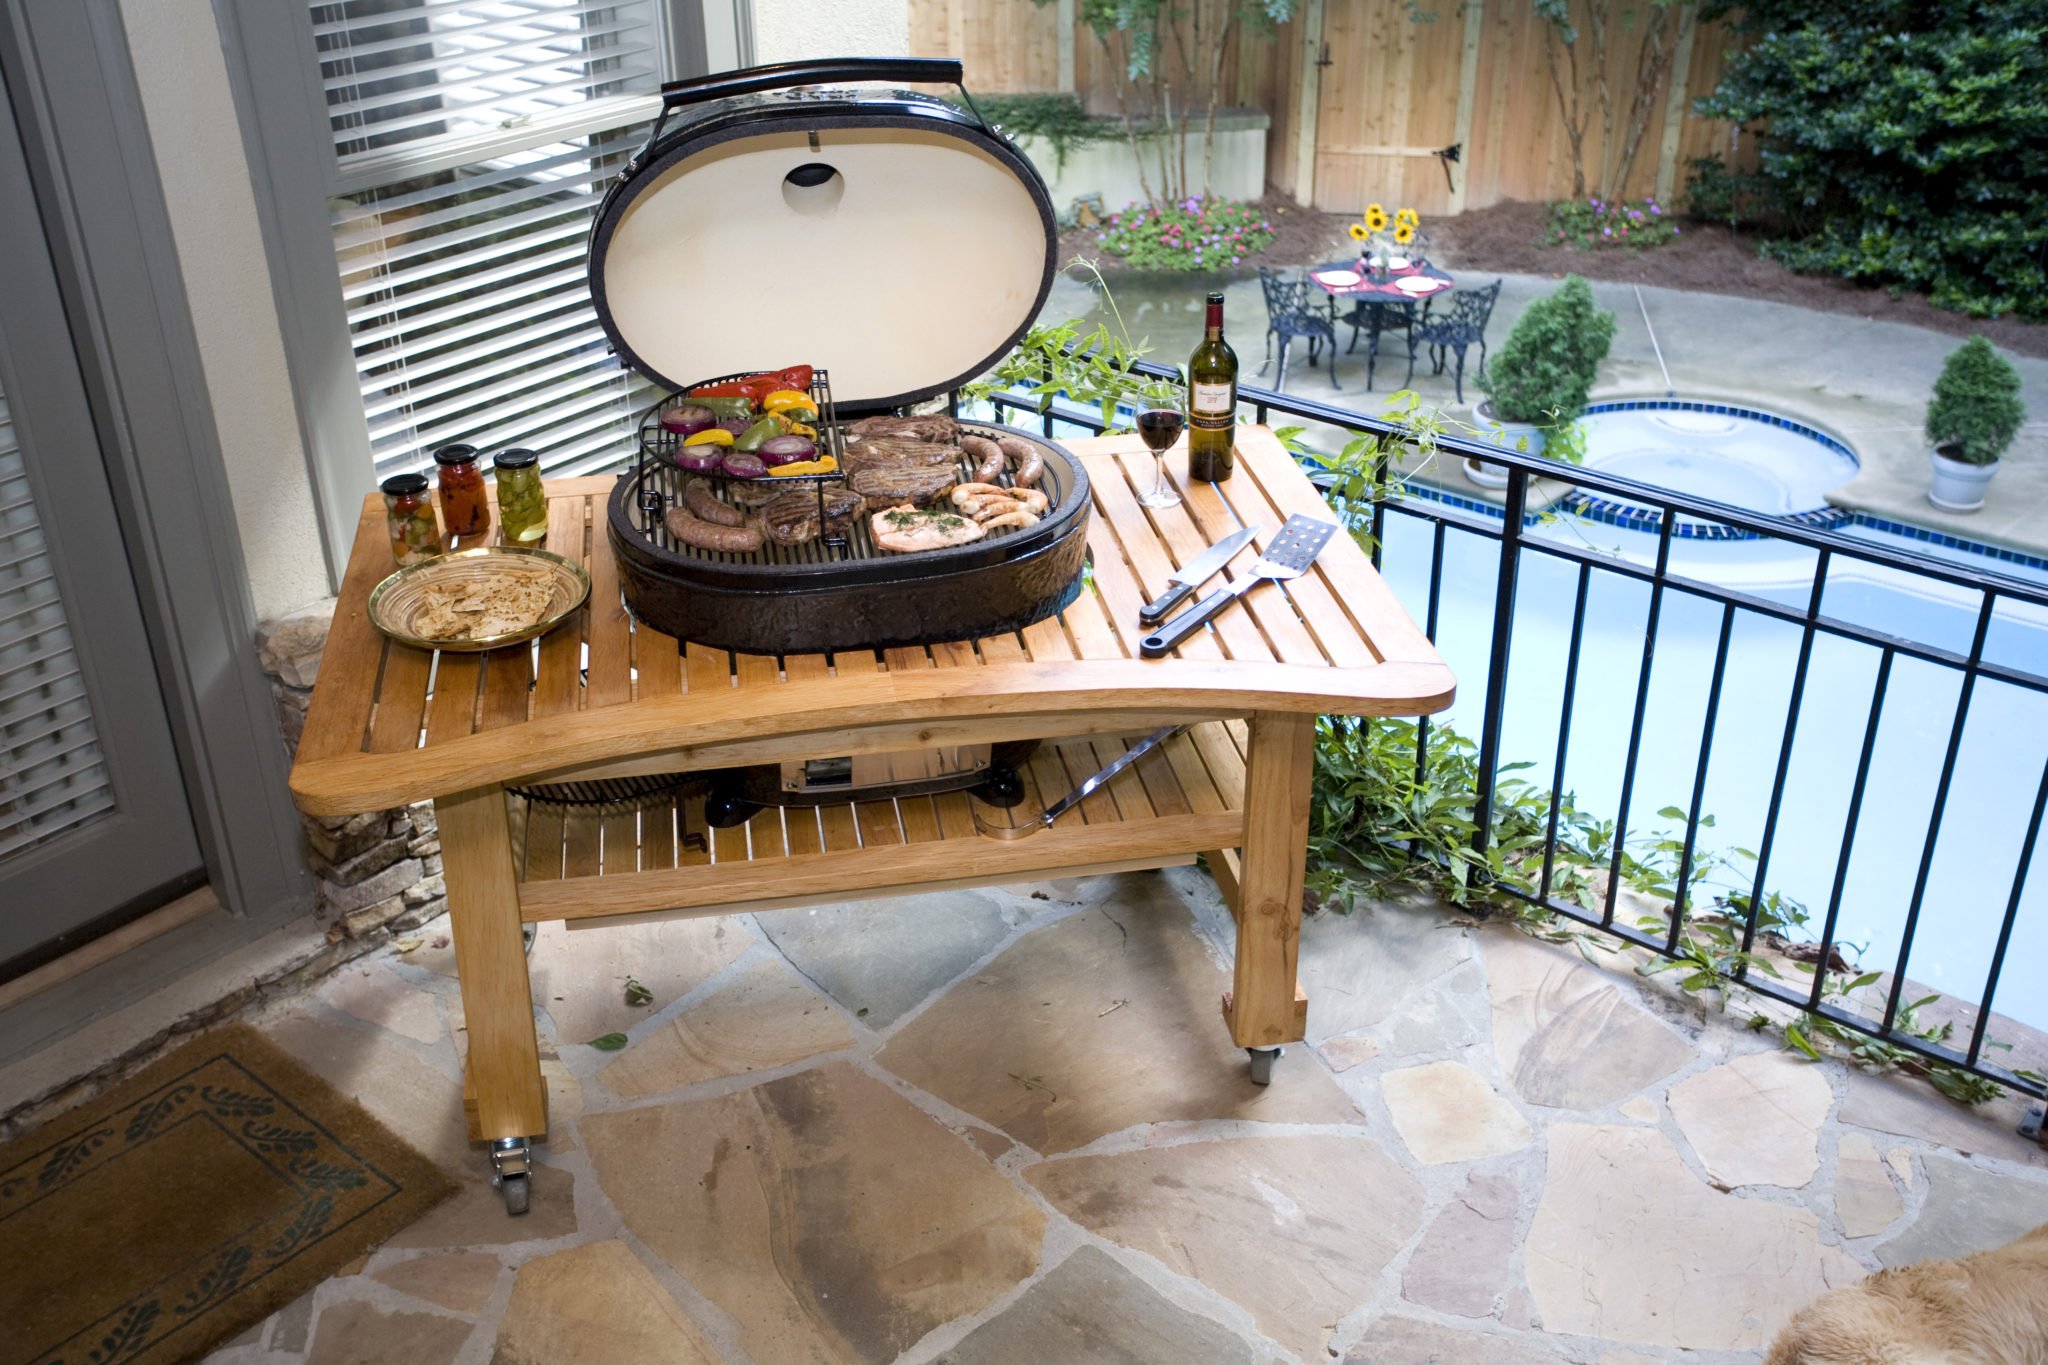 Oval XL Patio Outdoor Grill